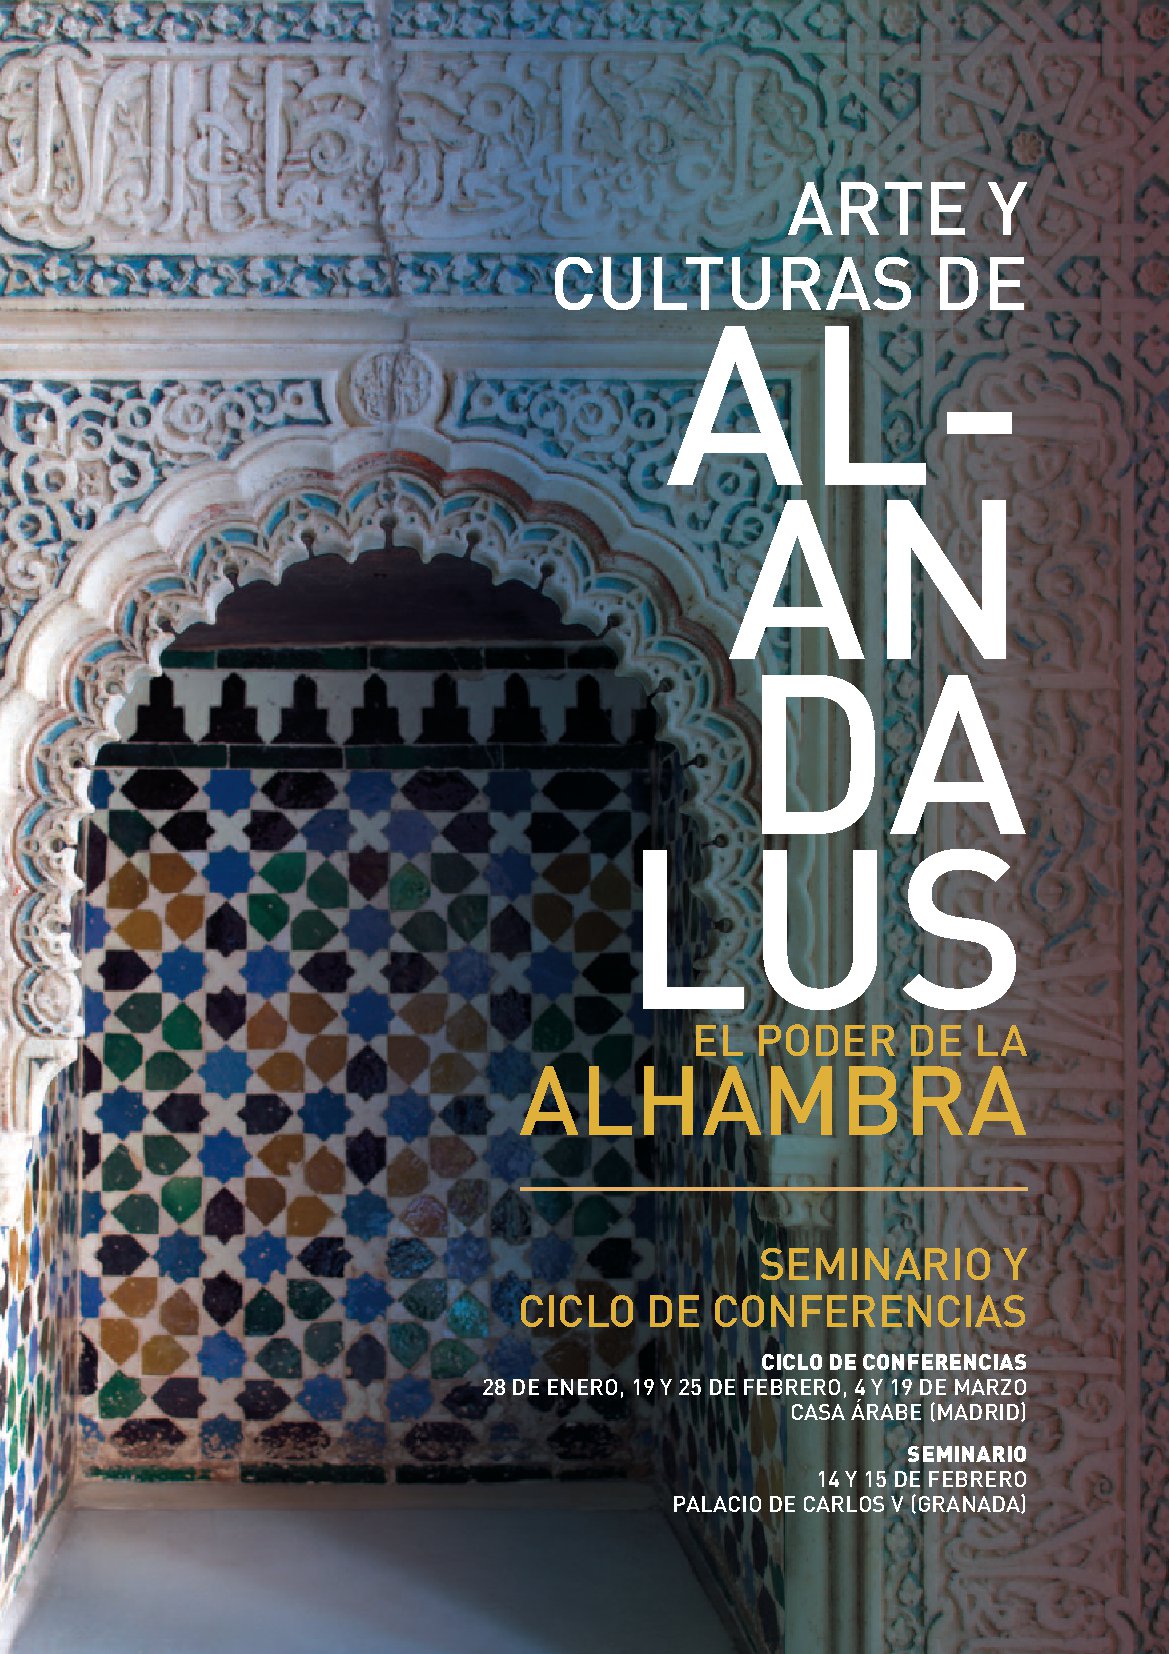 Art and Cultures of al-Andalus. The power of the Alhambra. International Seminar and Lecture Series.